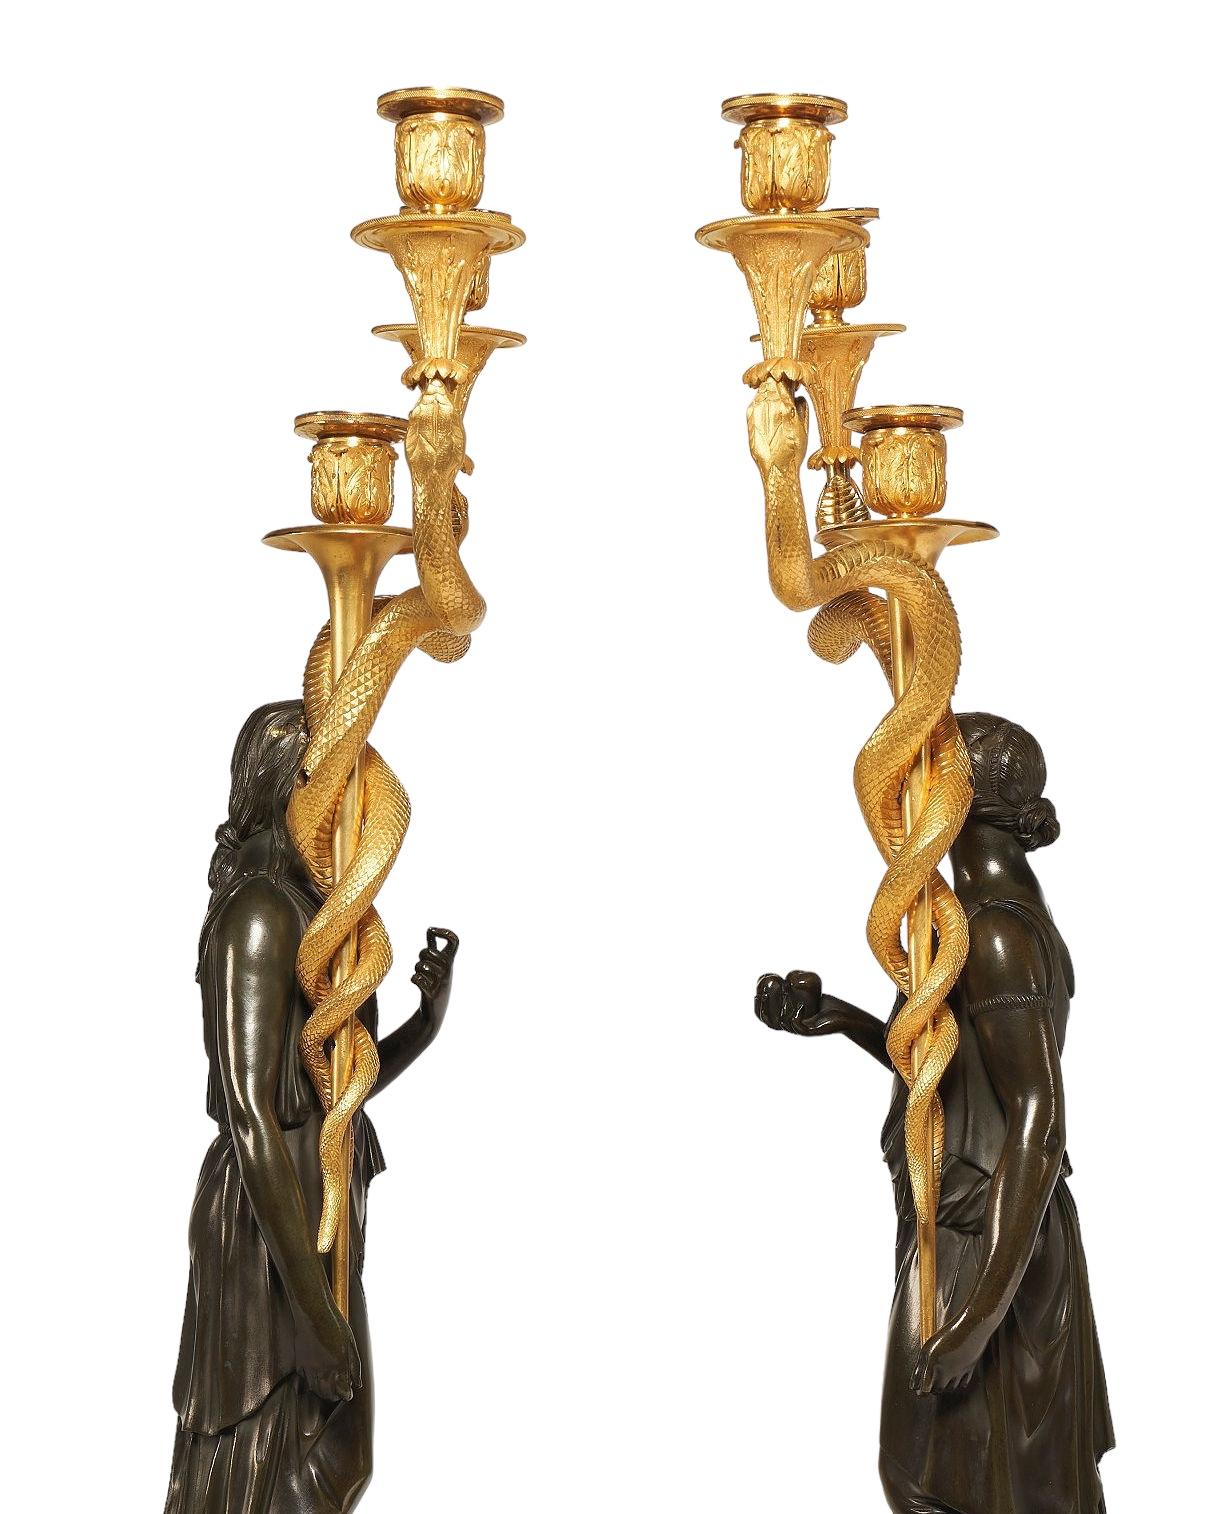 19th Century French Empire Style Ormolu and Patinated Bronze Figural Candelabra In Good Condition For Sale In New York, US